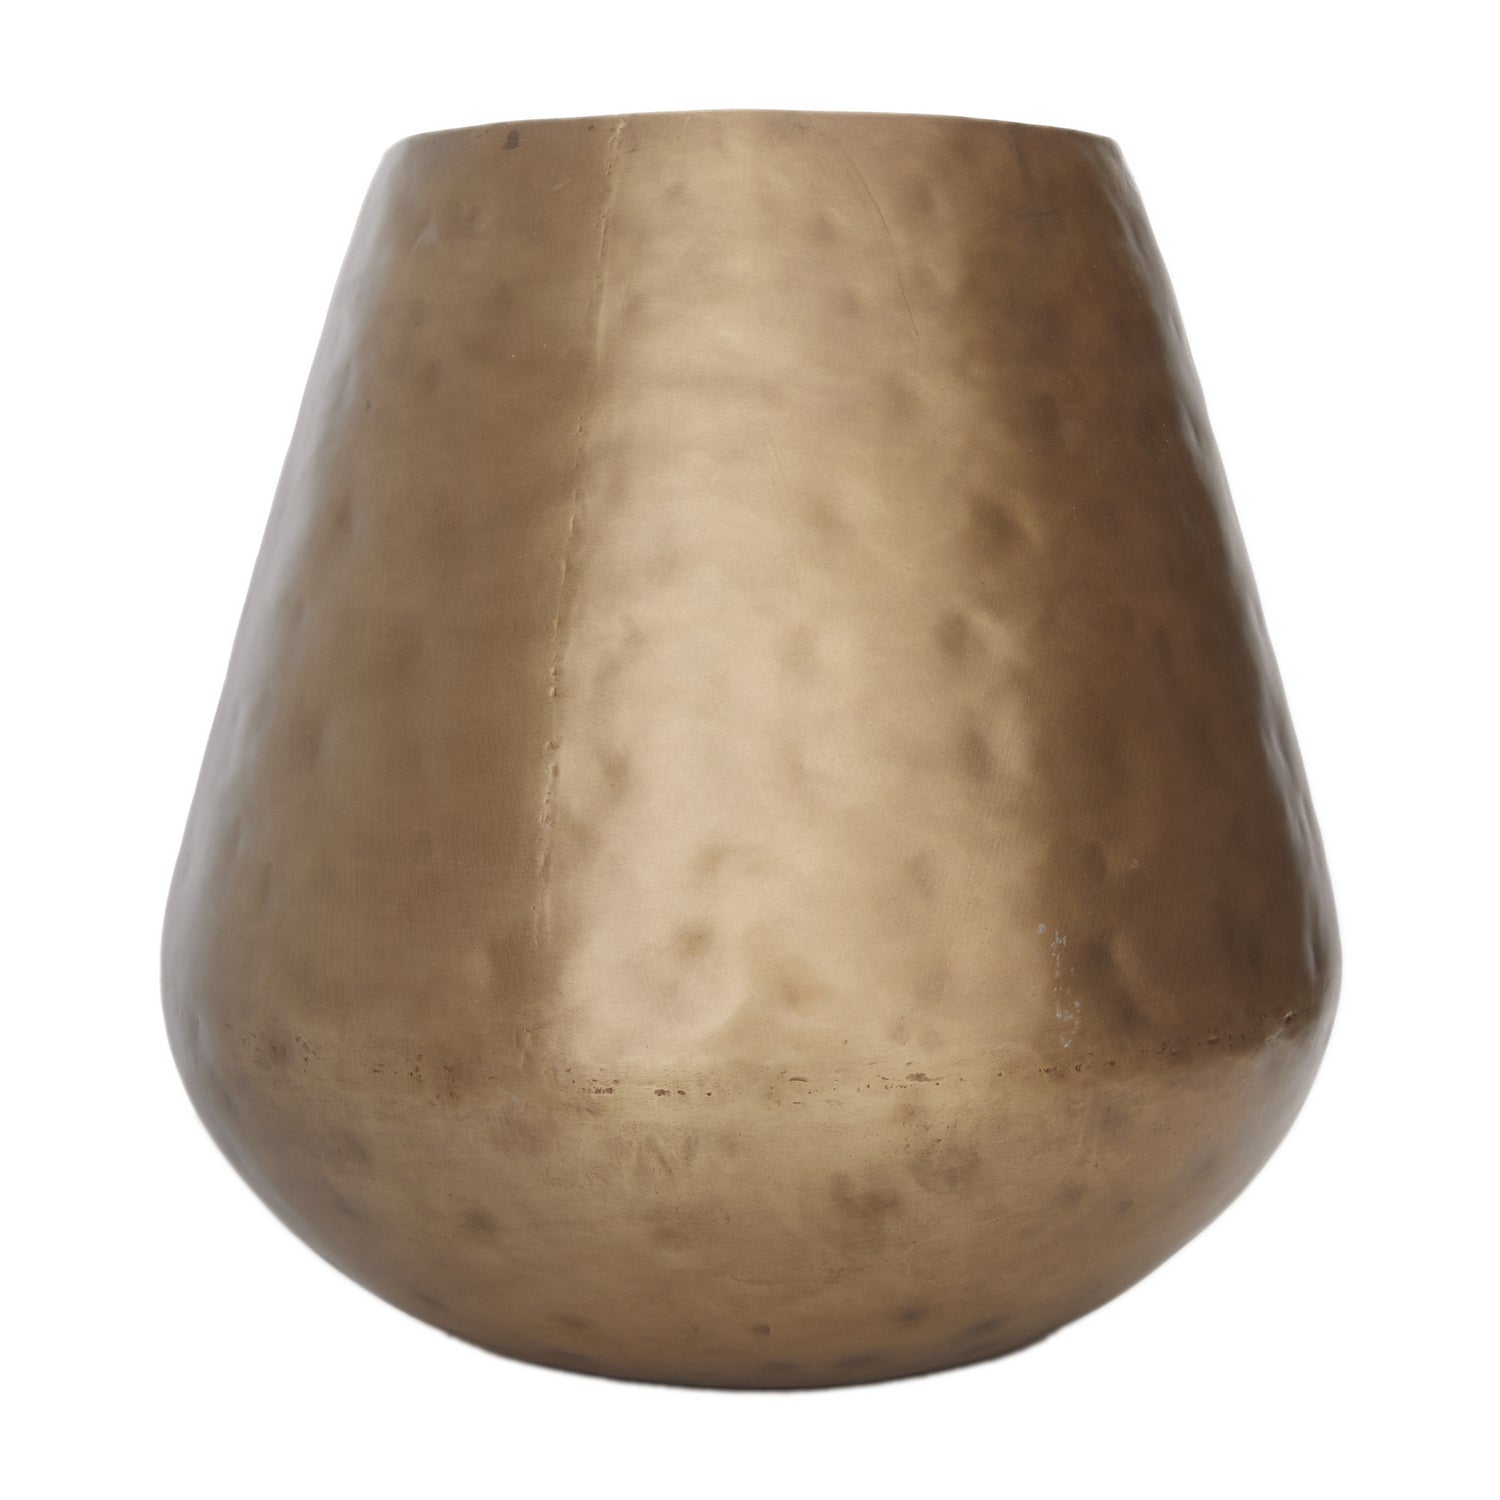 Vase from the Soledad collection in Antique Brass finish